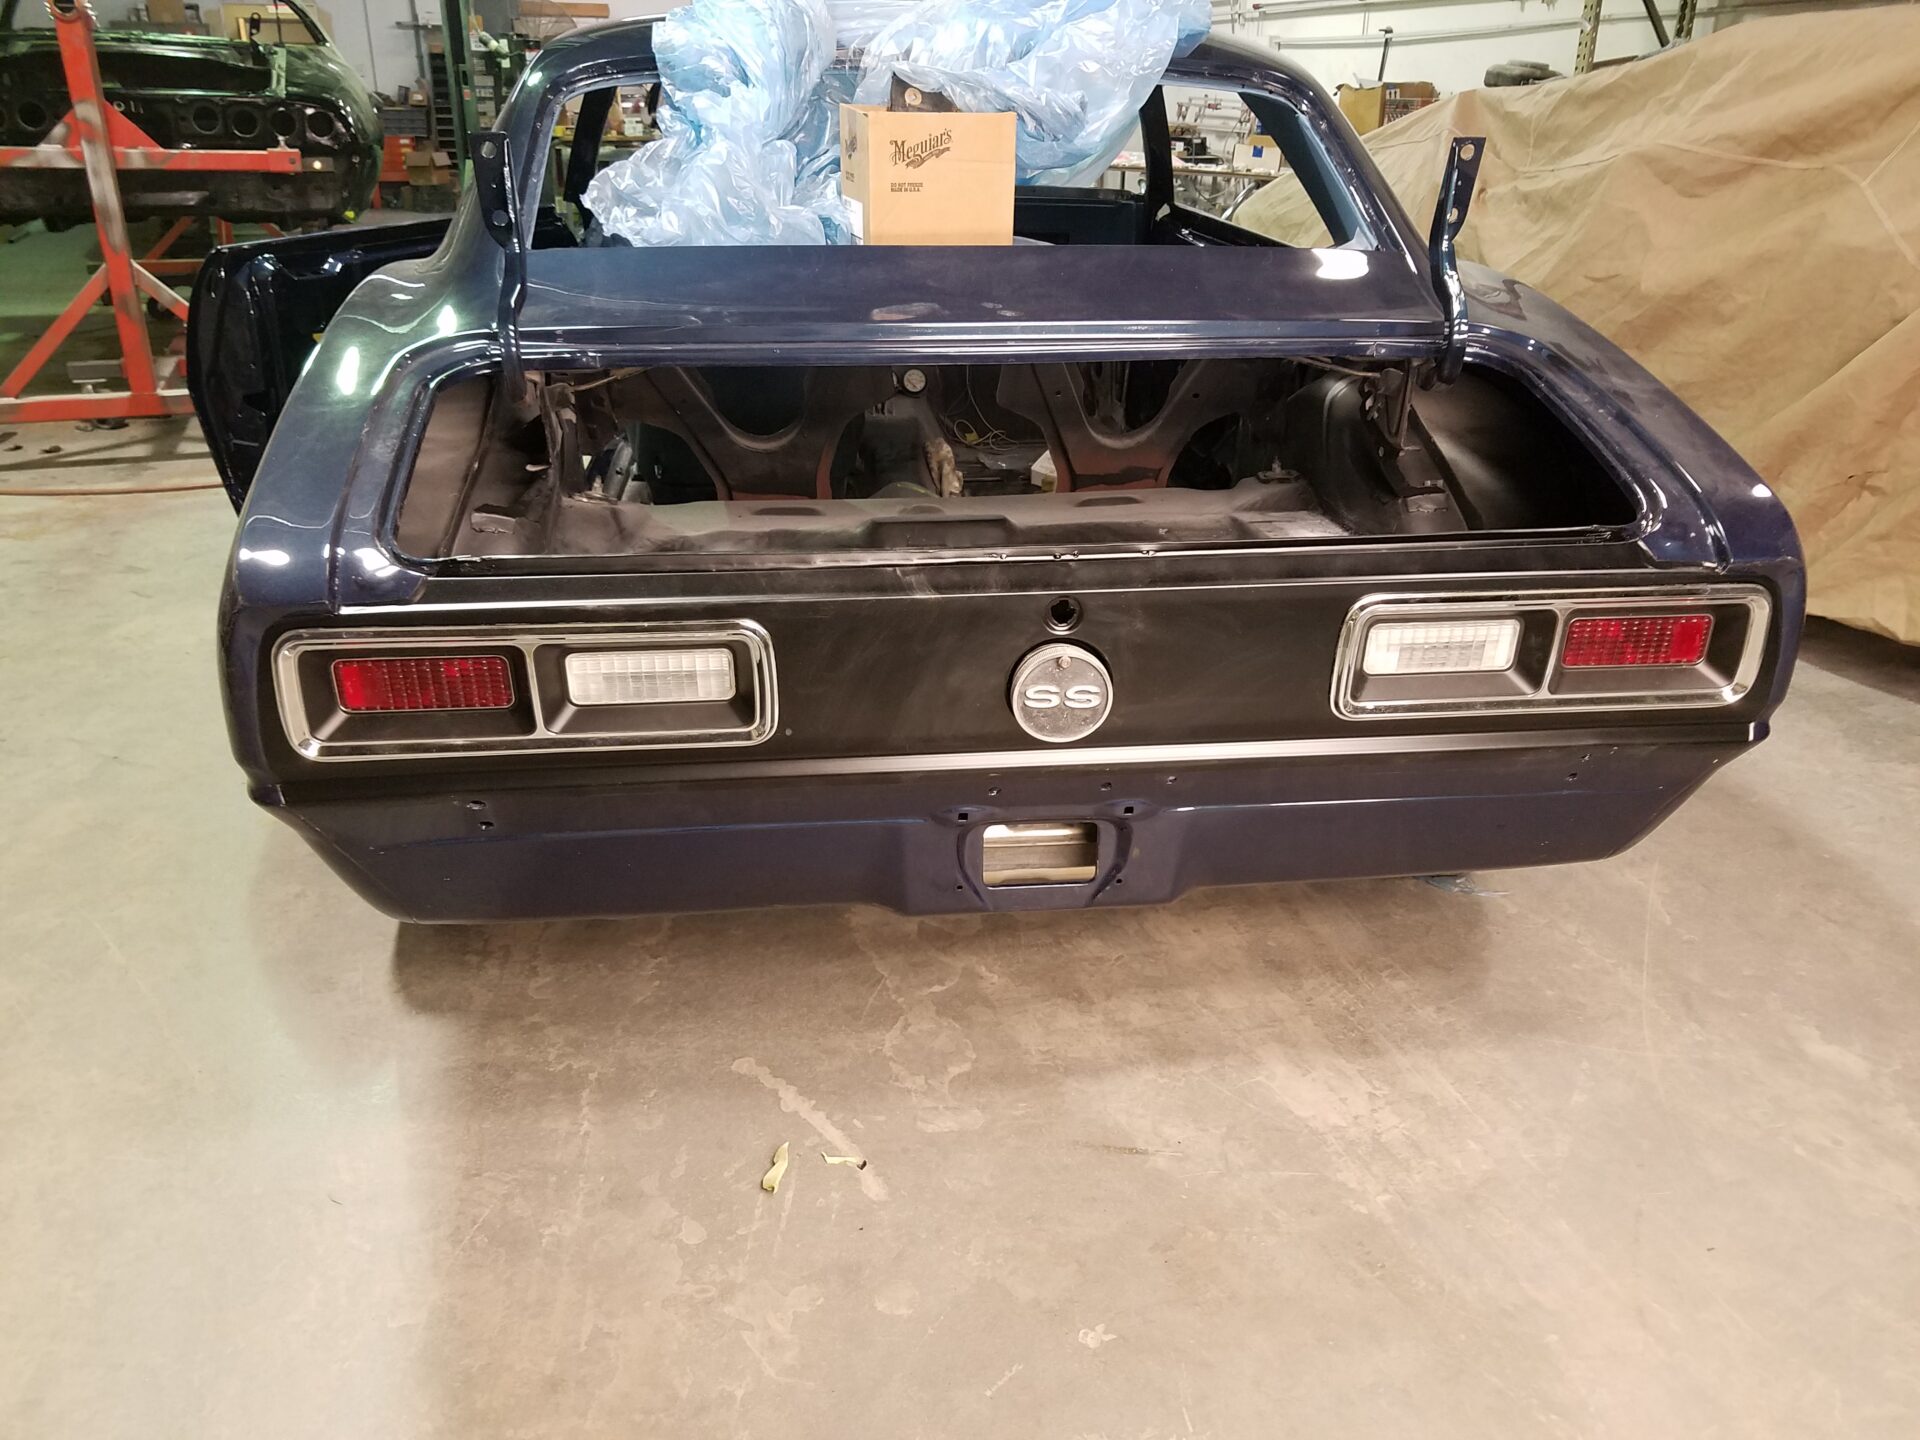 A trunk of the 1968 Chevy Camaro SS without a door